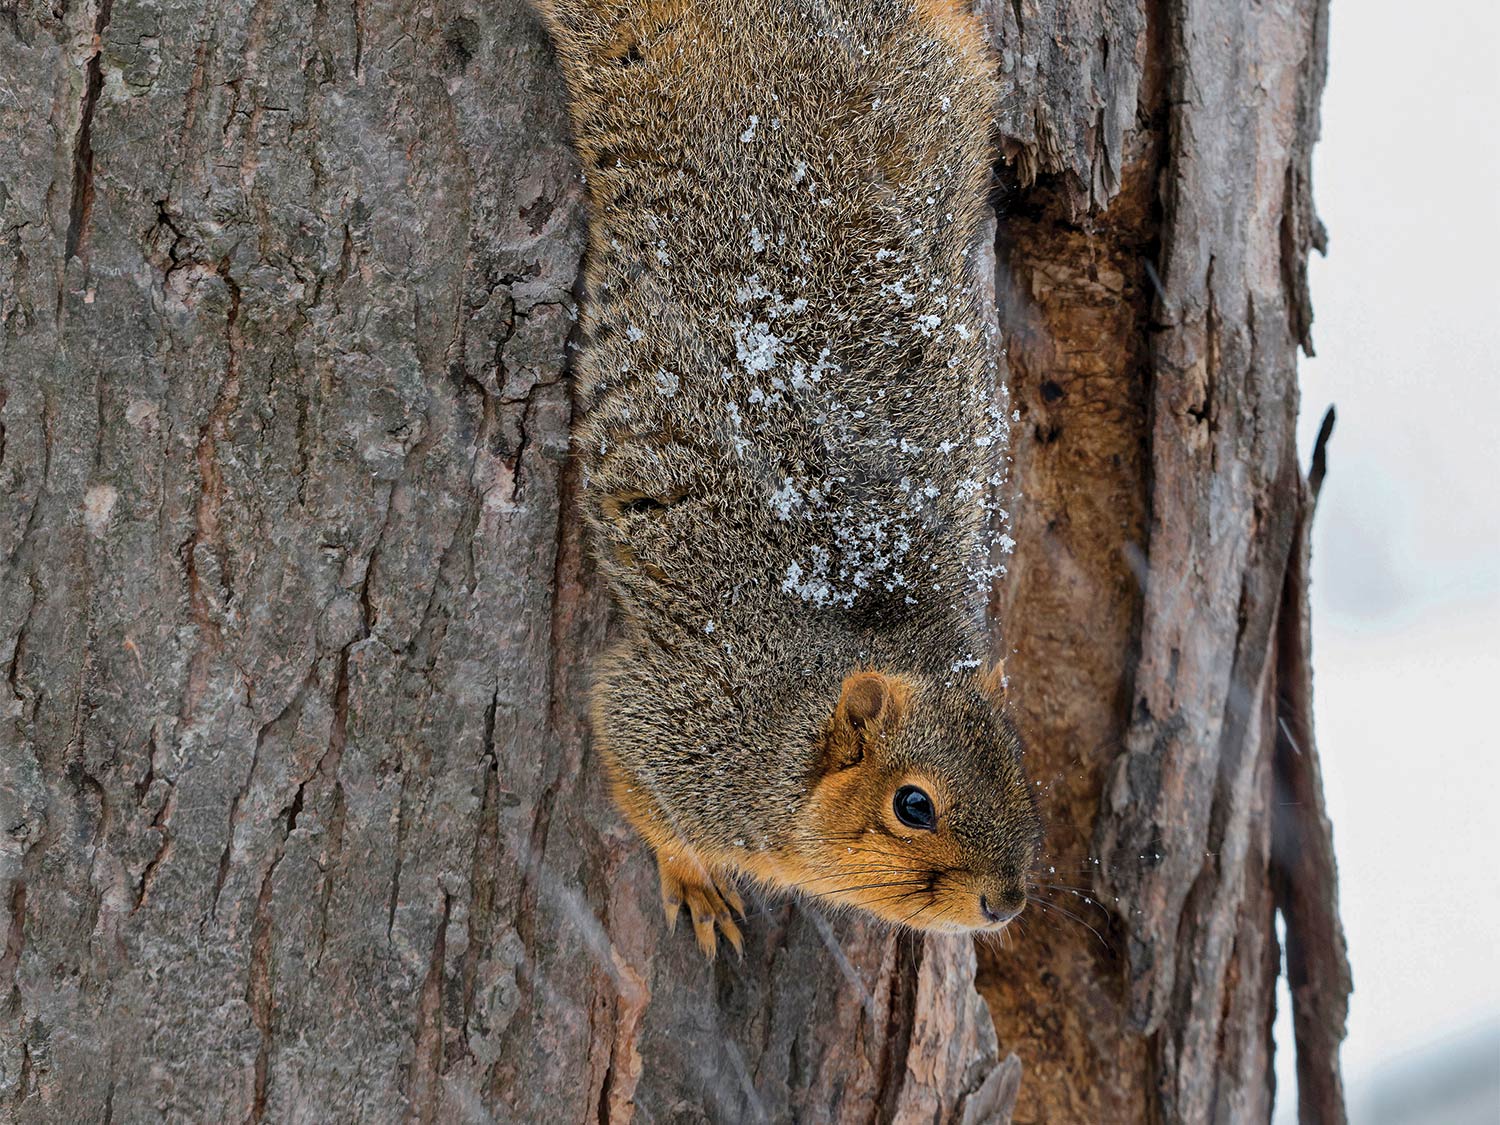 A squirrel climbs down the side of a tree in the snow.